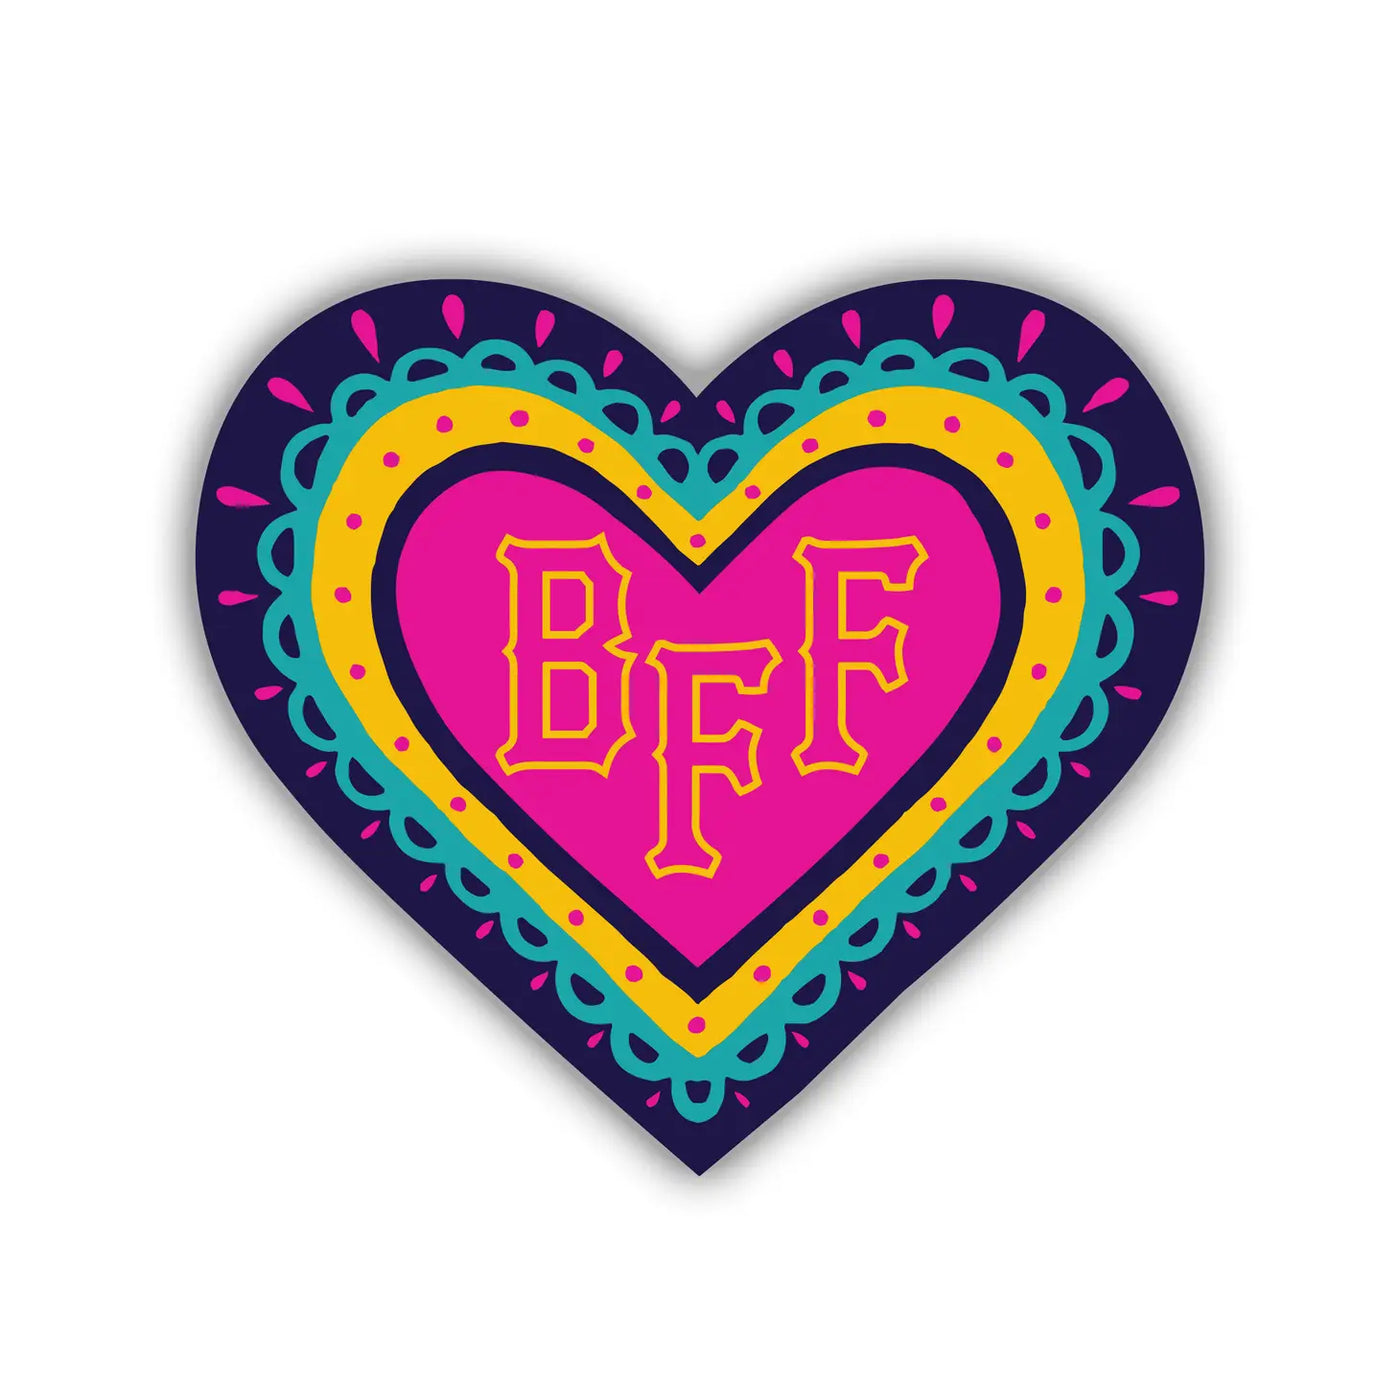 Dark purple heart with a yellow, pink and teal outlines and the phrase BFF in the center.